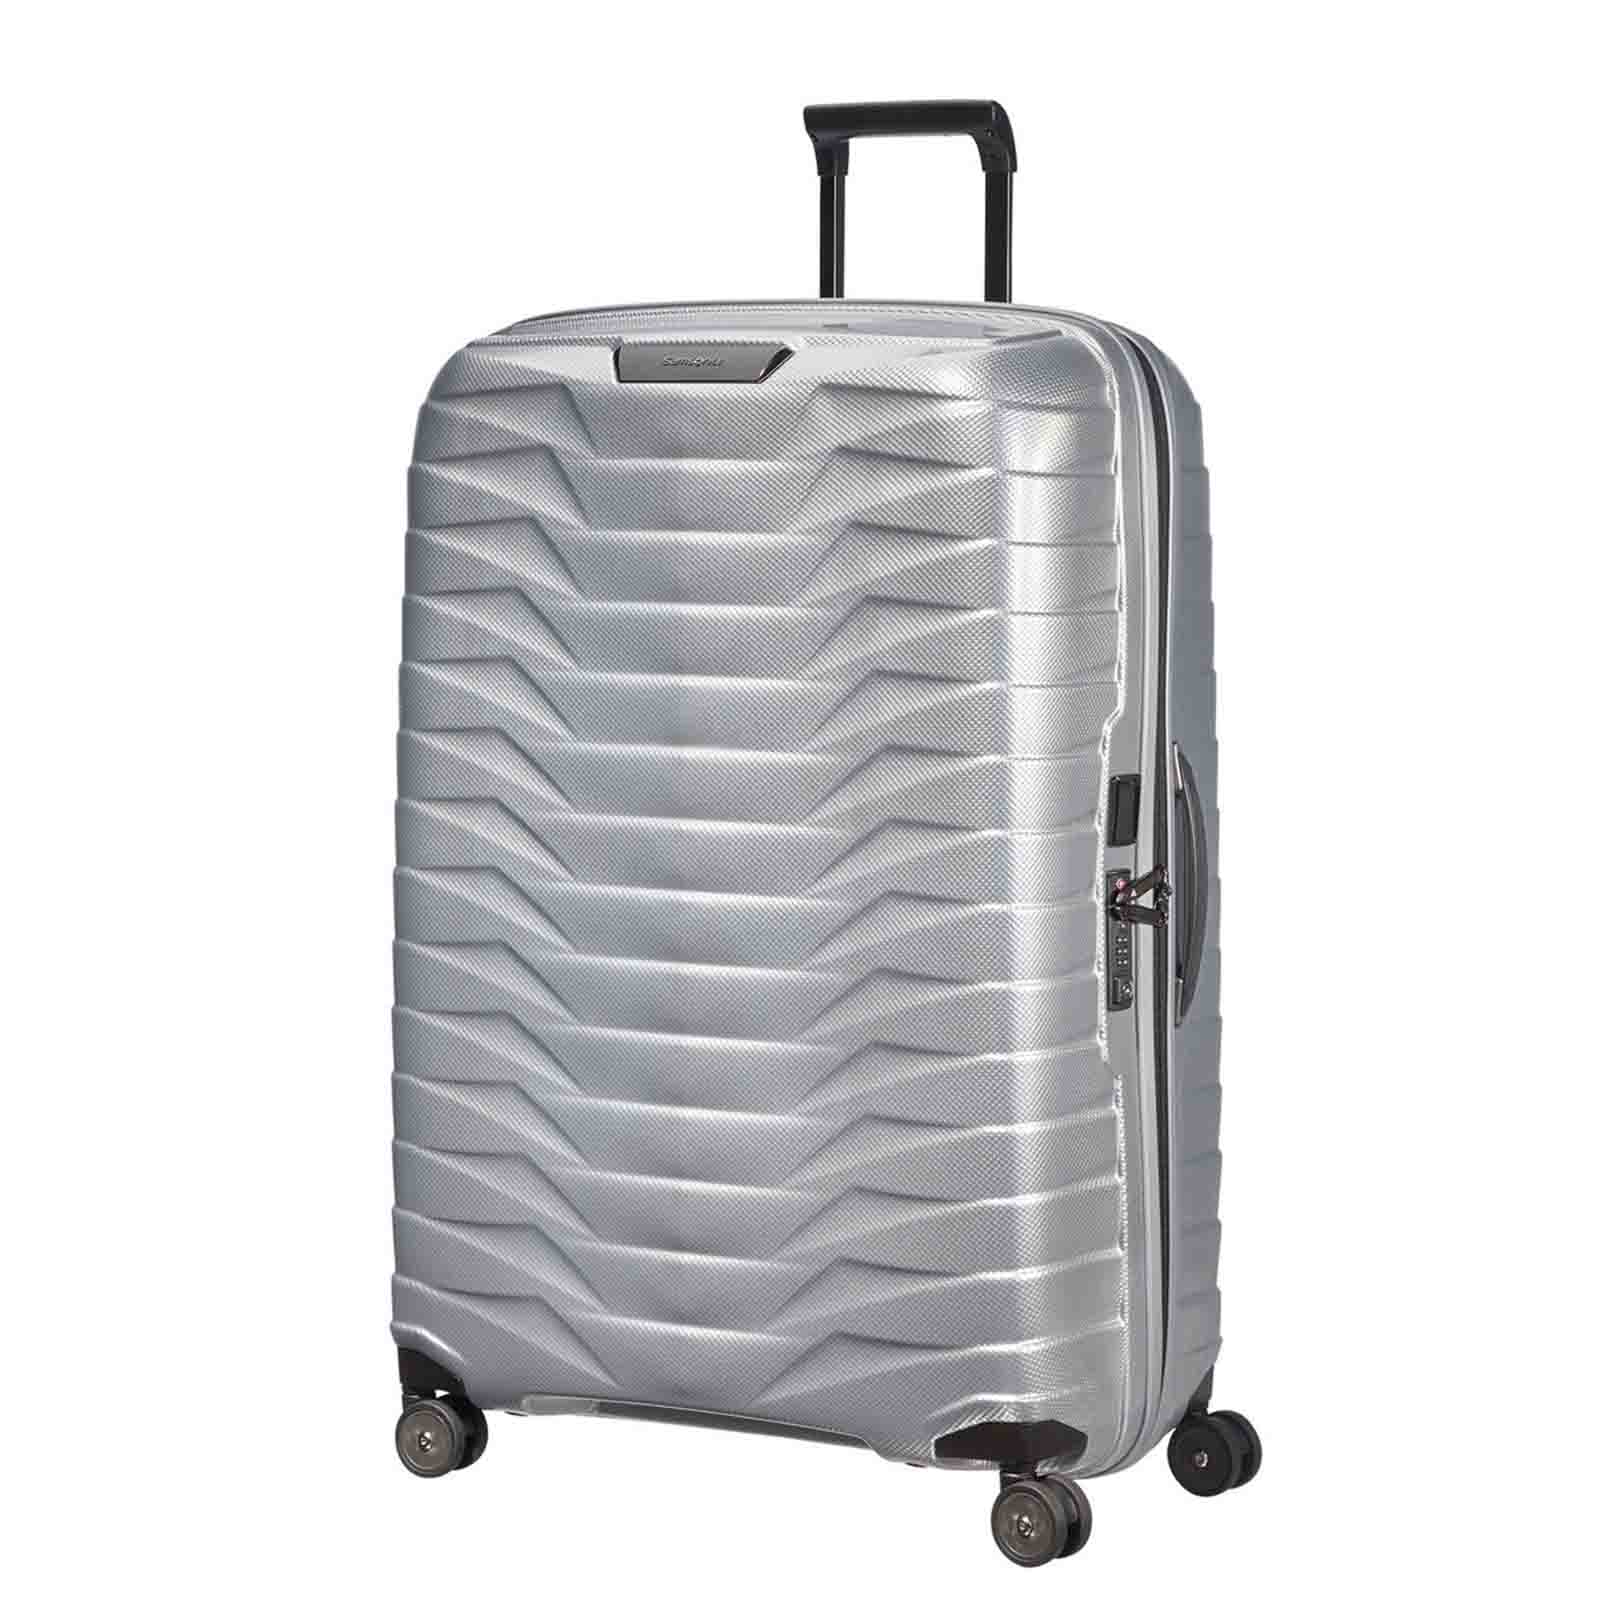 Samsonite-Proxis-81cm-Suitcase-Silver-Front-Angle